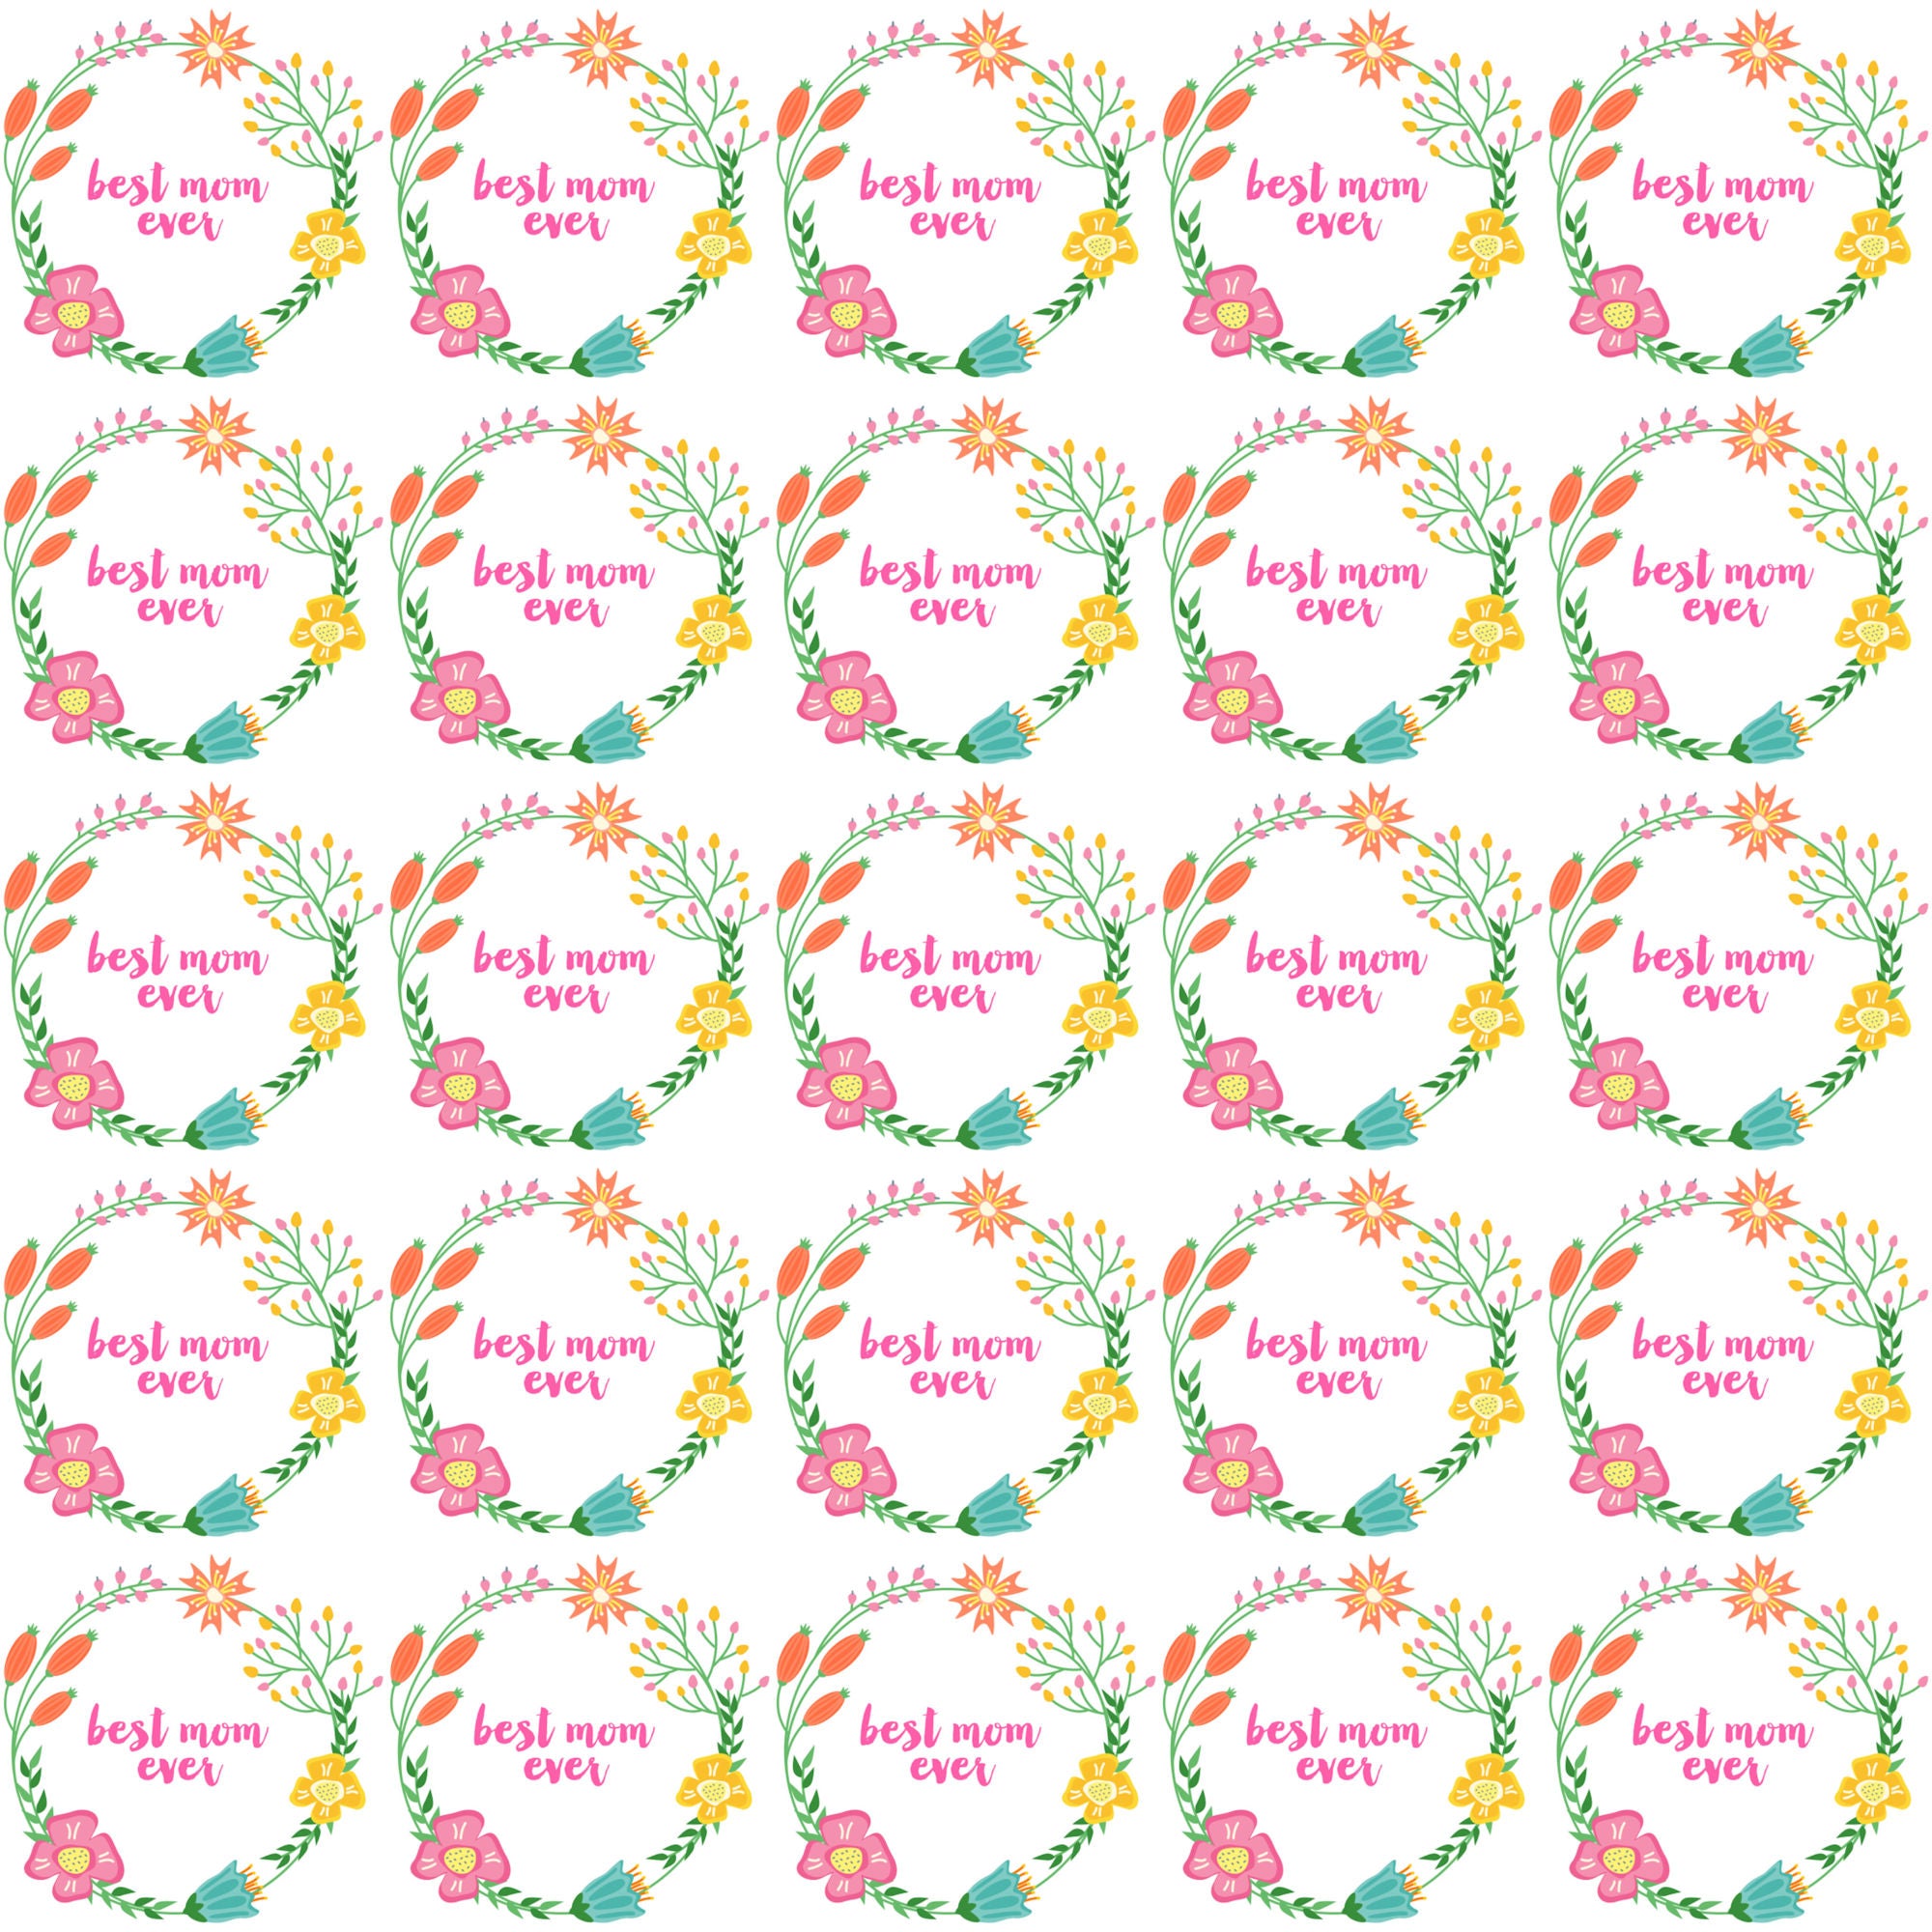 Happy Mother's Day Collection Best Mom Ever 12 x 12 Double-Sided Scrapbook Paper by SSC Designs